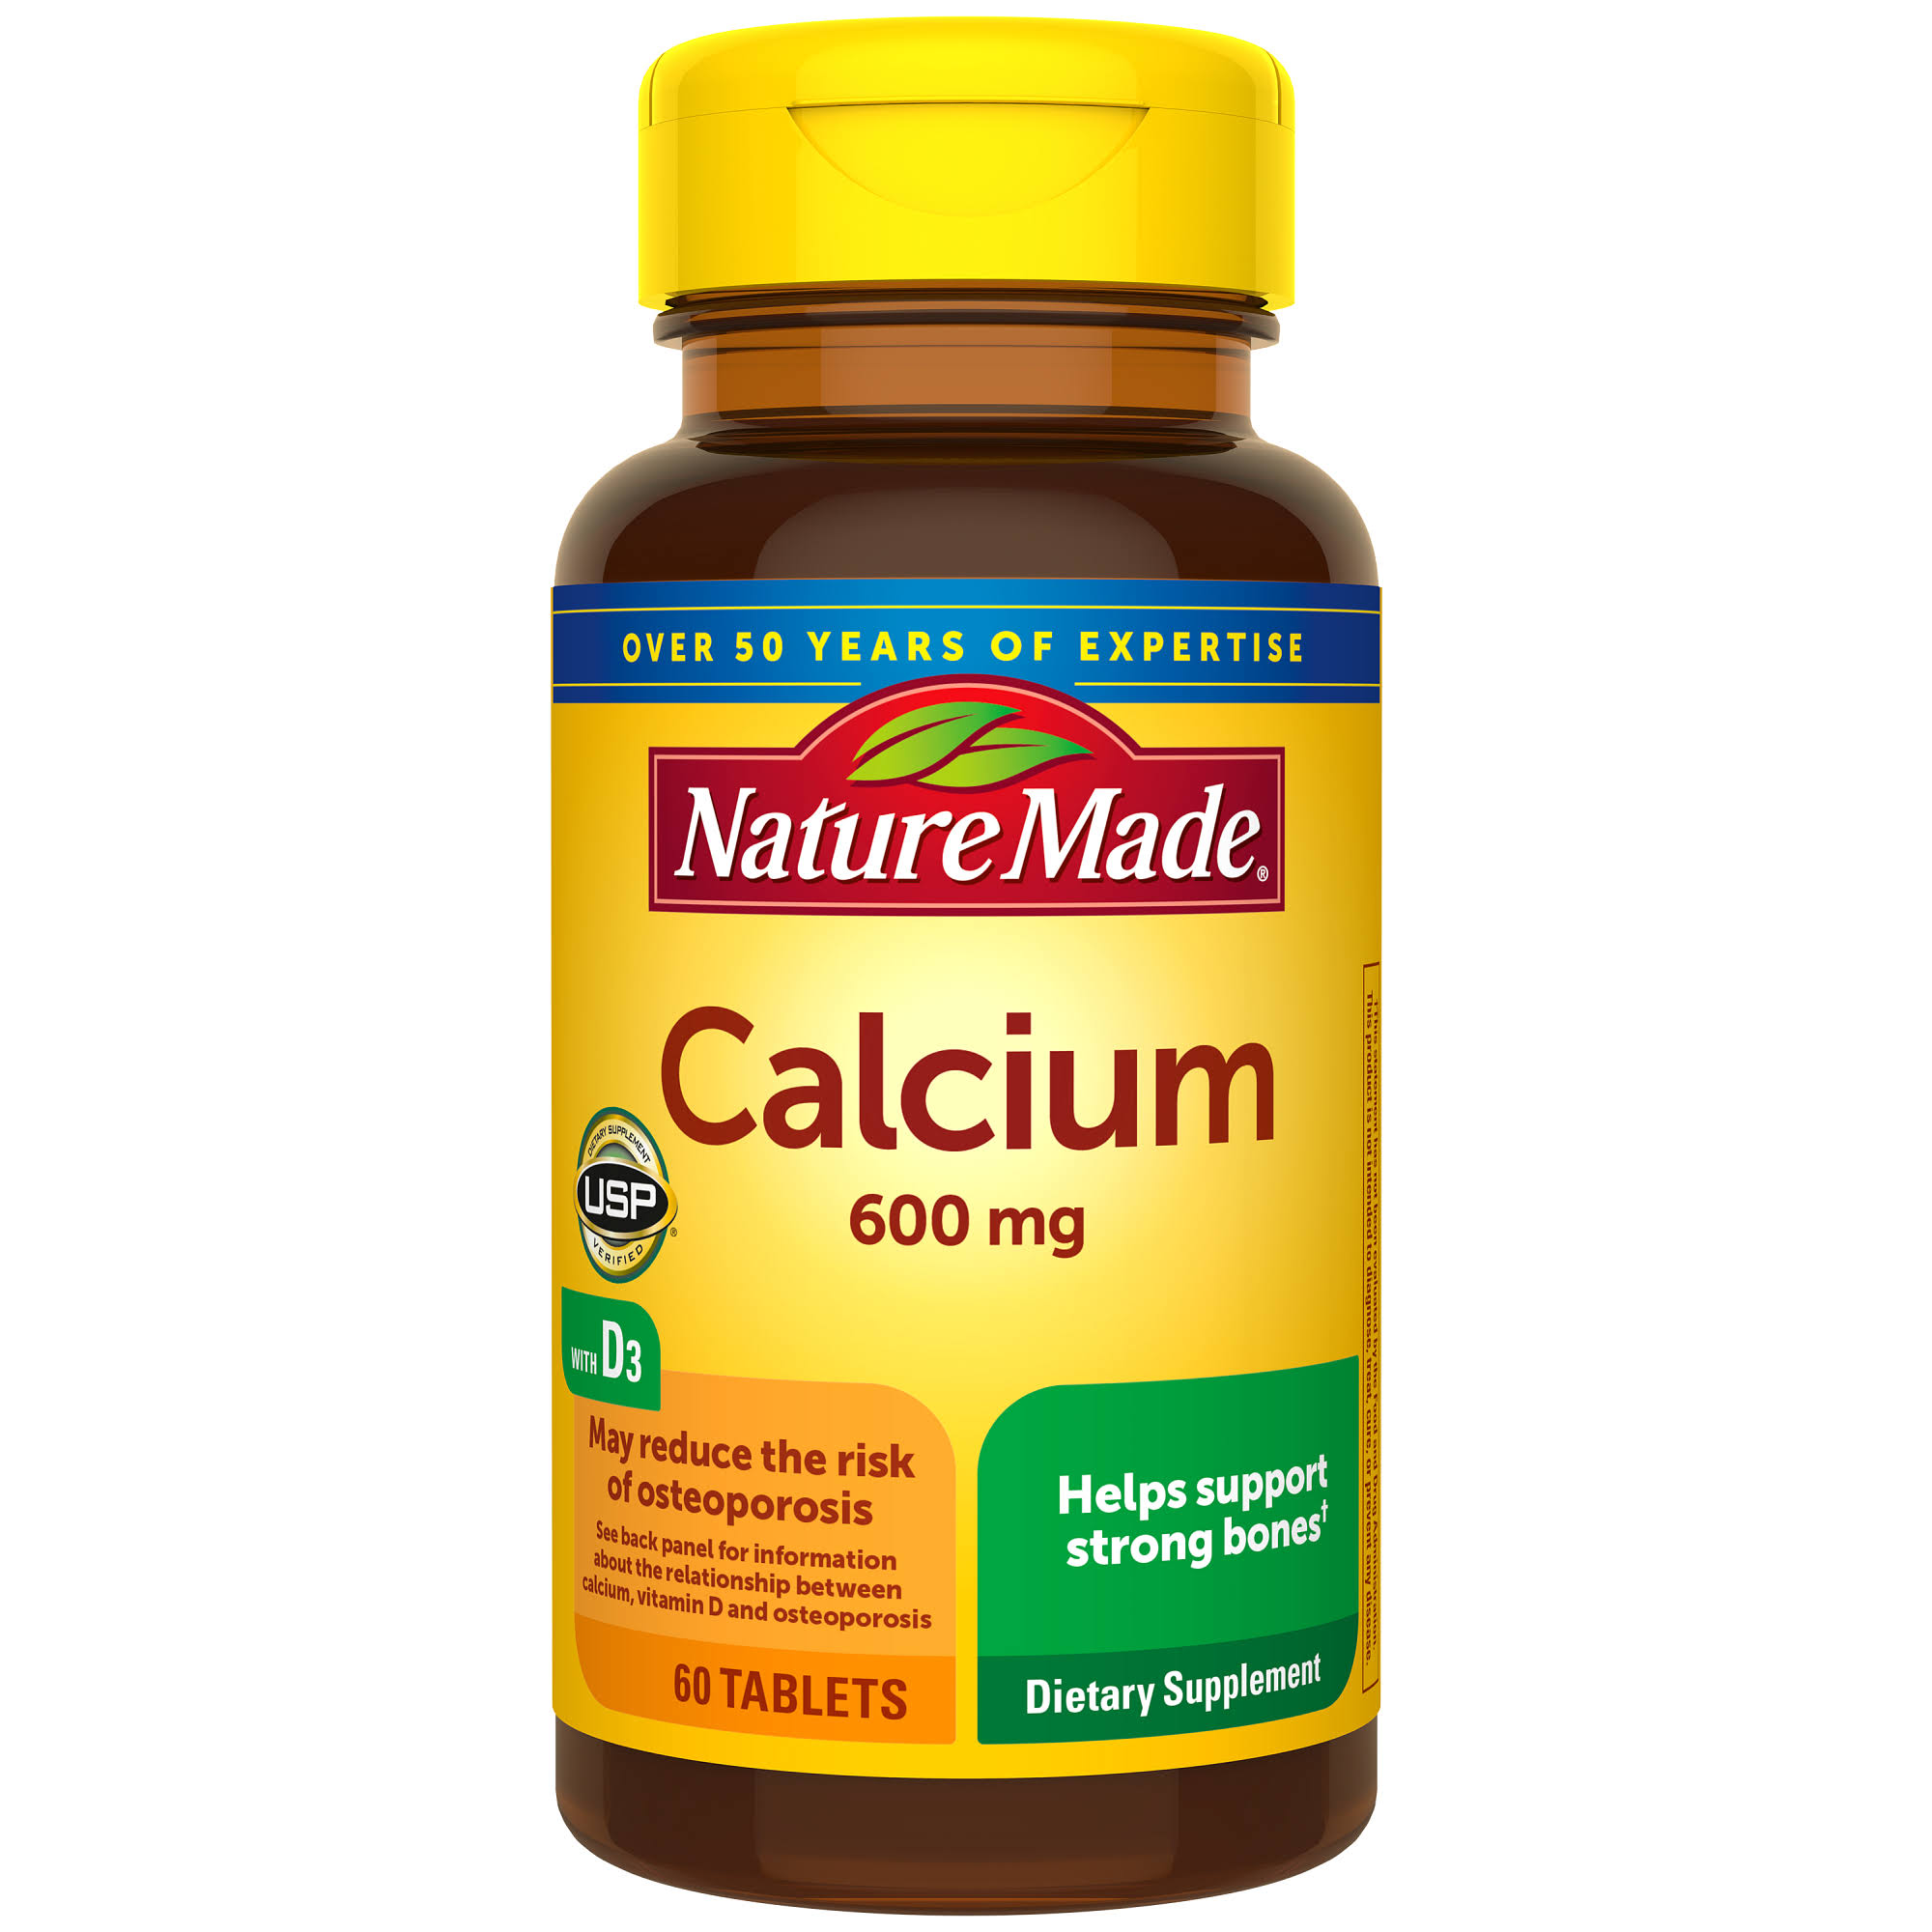 Nature Made Calcium & Vitamin D 600Mg Dietary Supplement - 60 Tablets